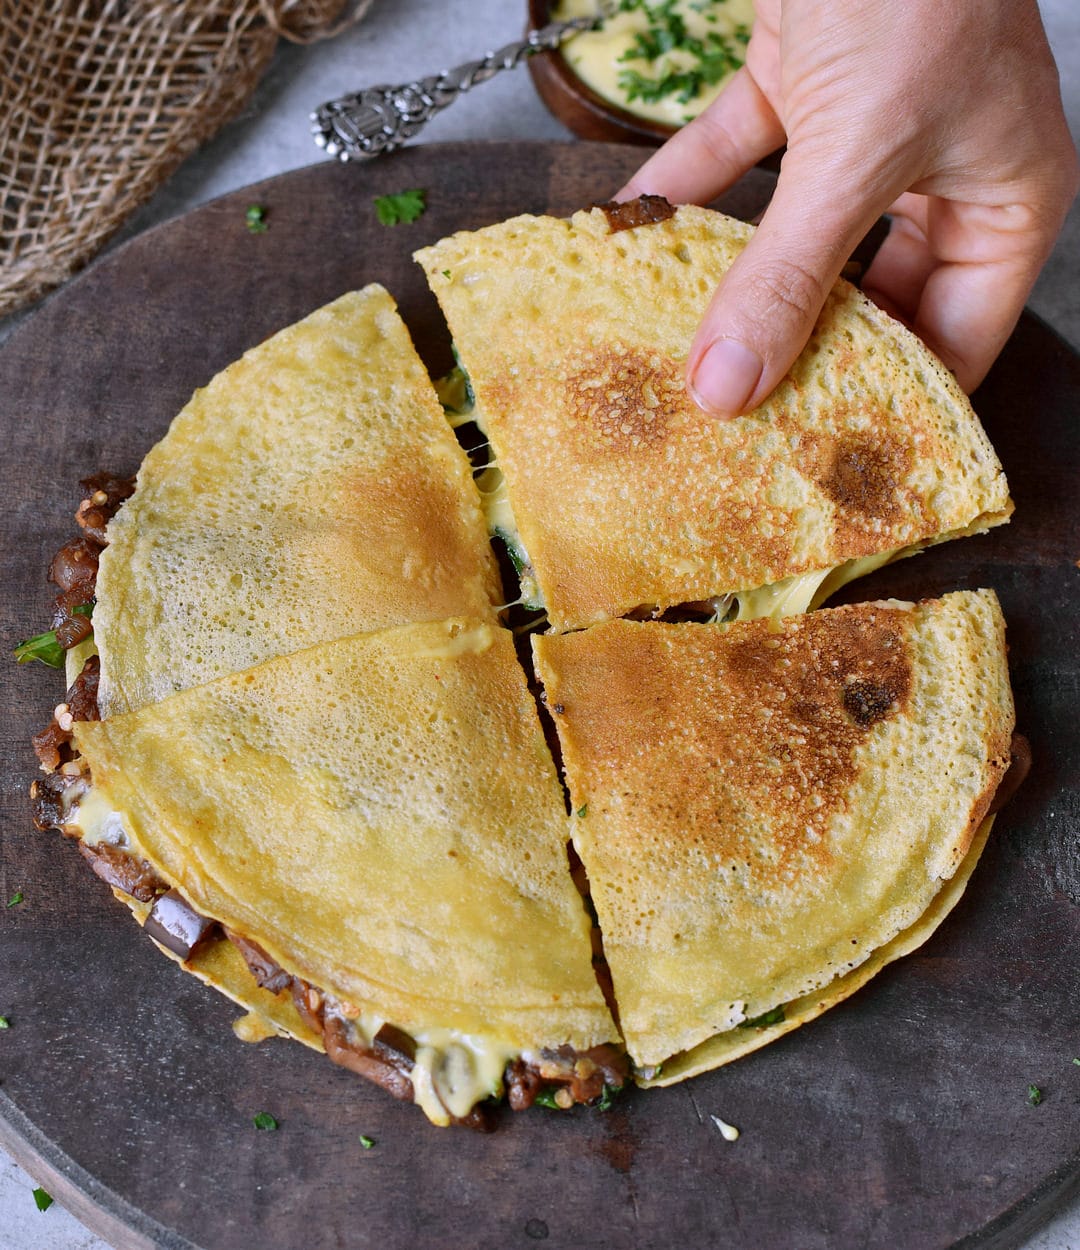 spinach quesadillas filled with eggplant and vegan cheese